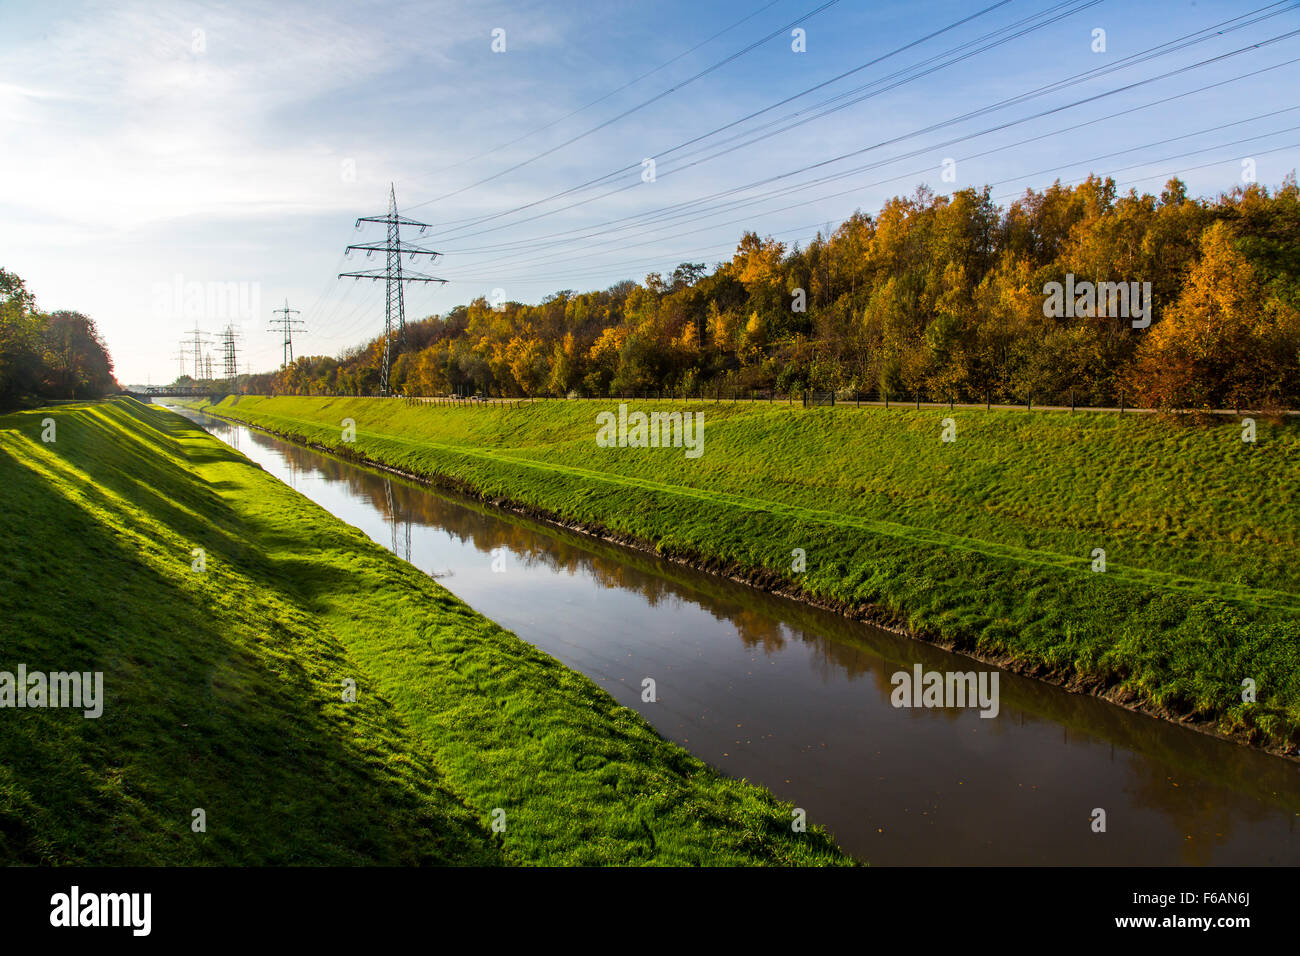 The Emscher, an industrial used river for waste water, passing Nordsternpark in Gelsenkirchen, Germany Stock Photo